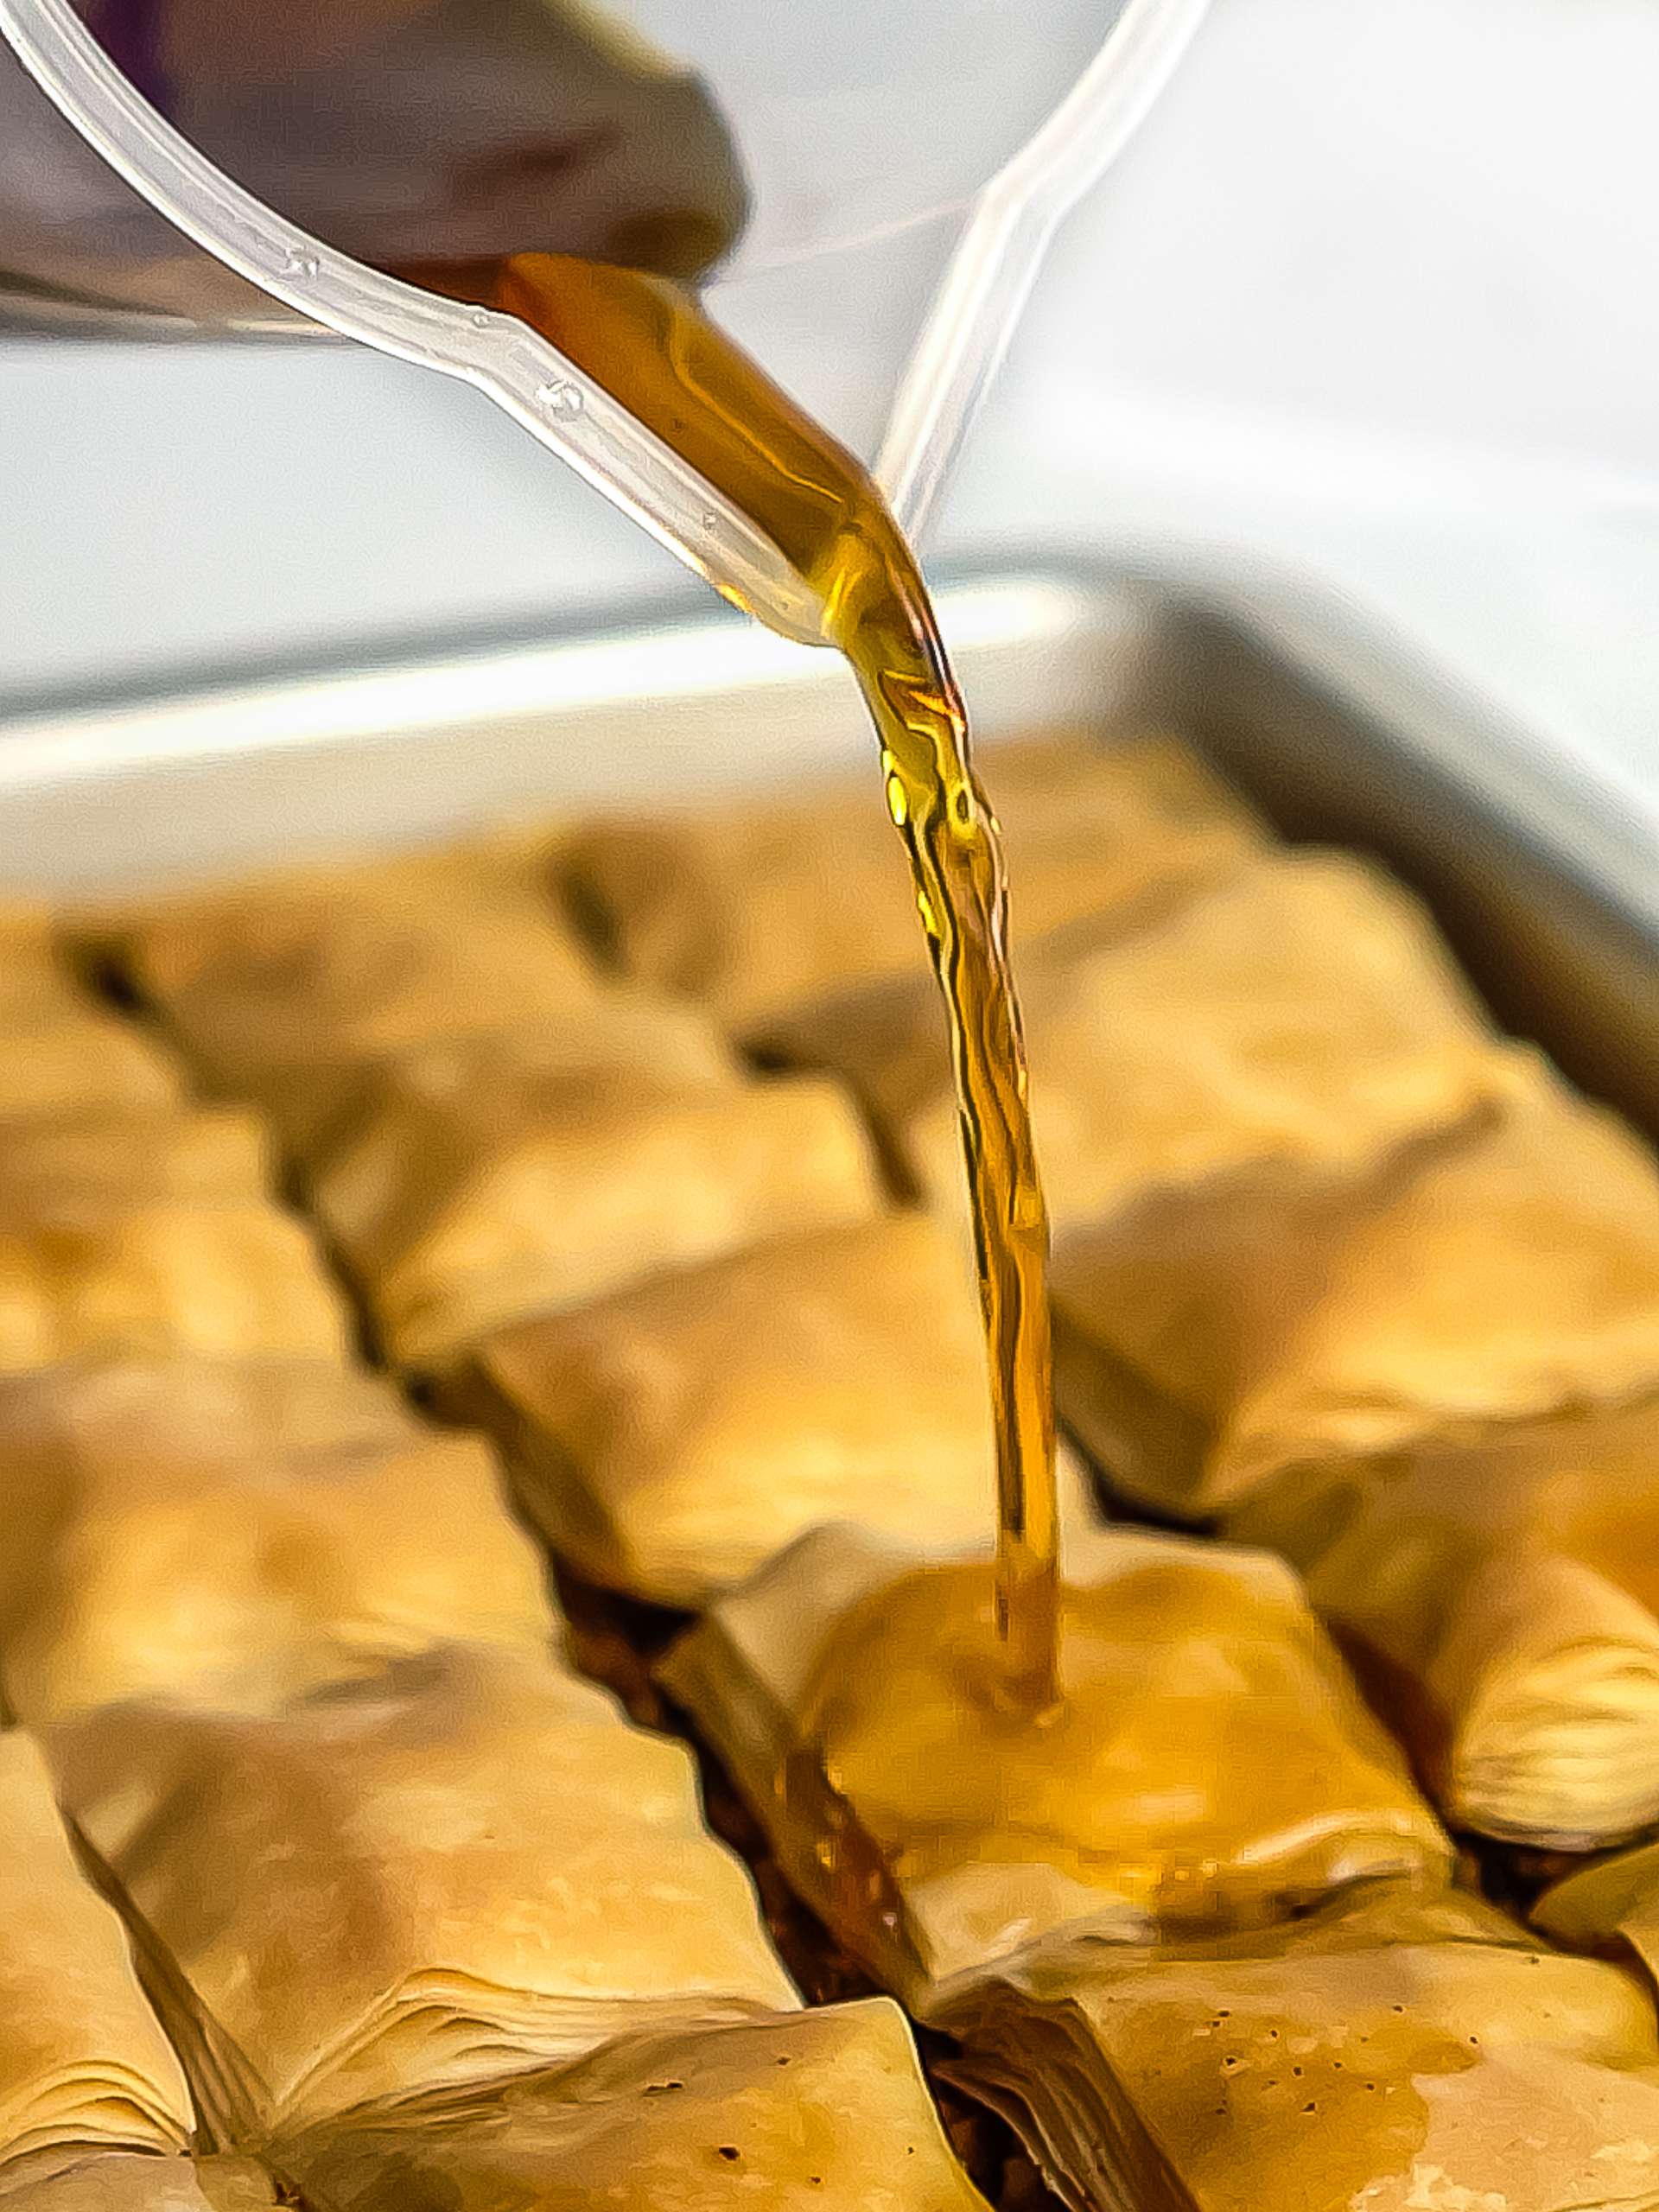 baklava drizzled with maple syrup